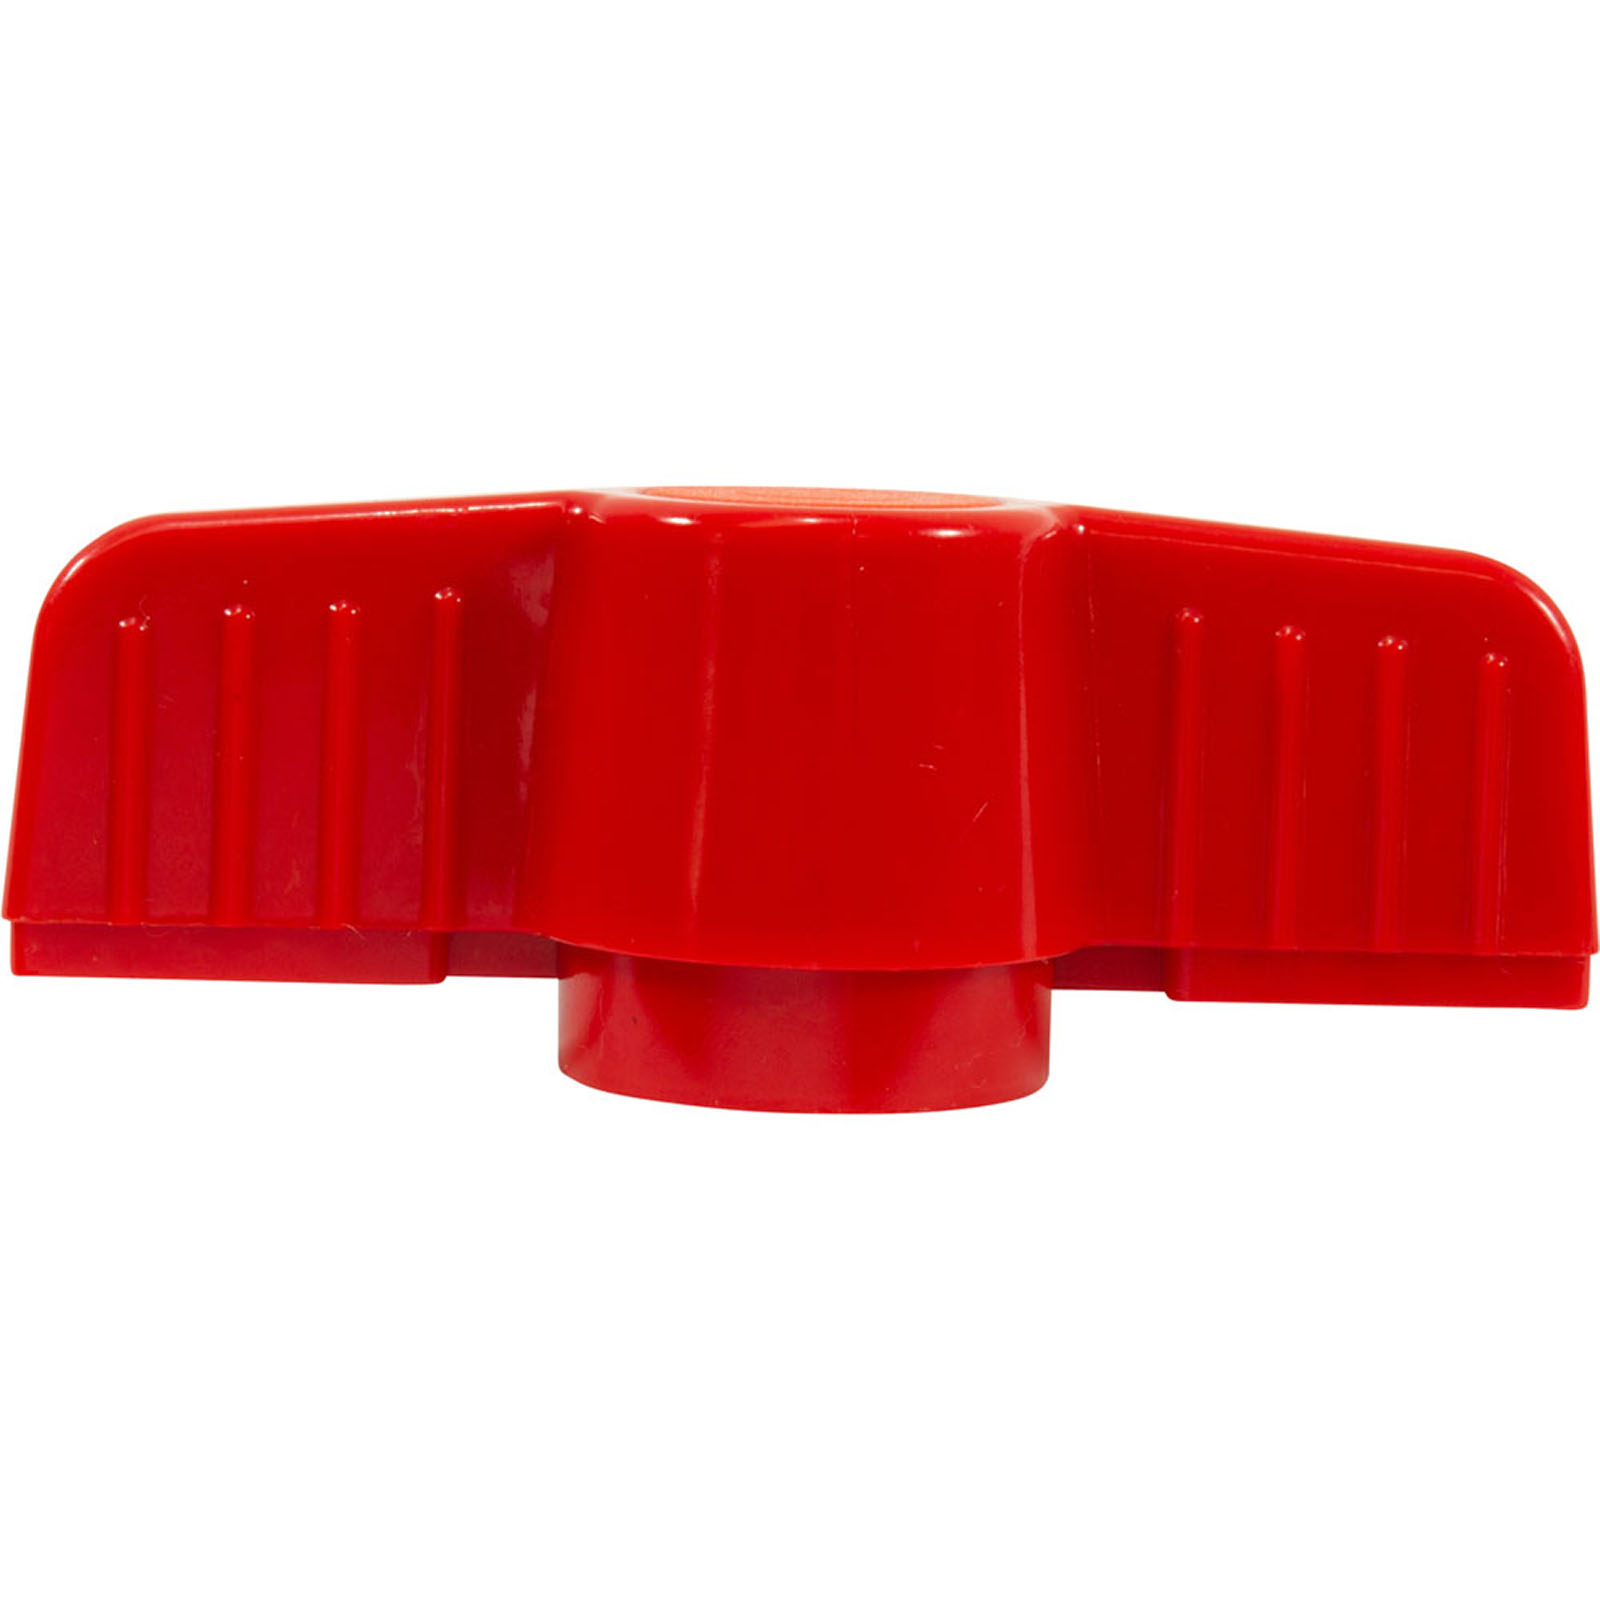 HORIZON SPA & POOL PARTS Replacement Handle, 1-1/2" HMIP Ball Valve, Red